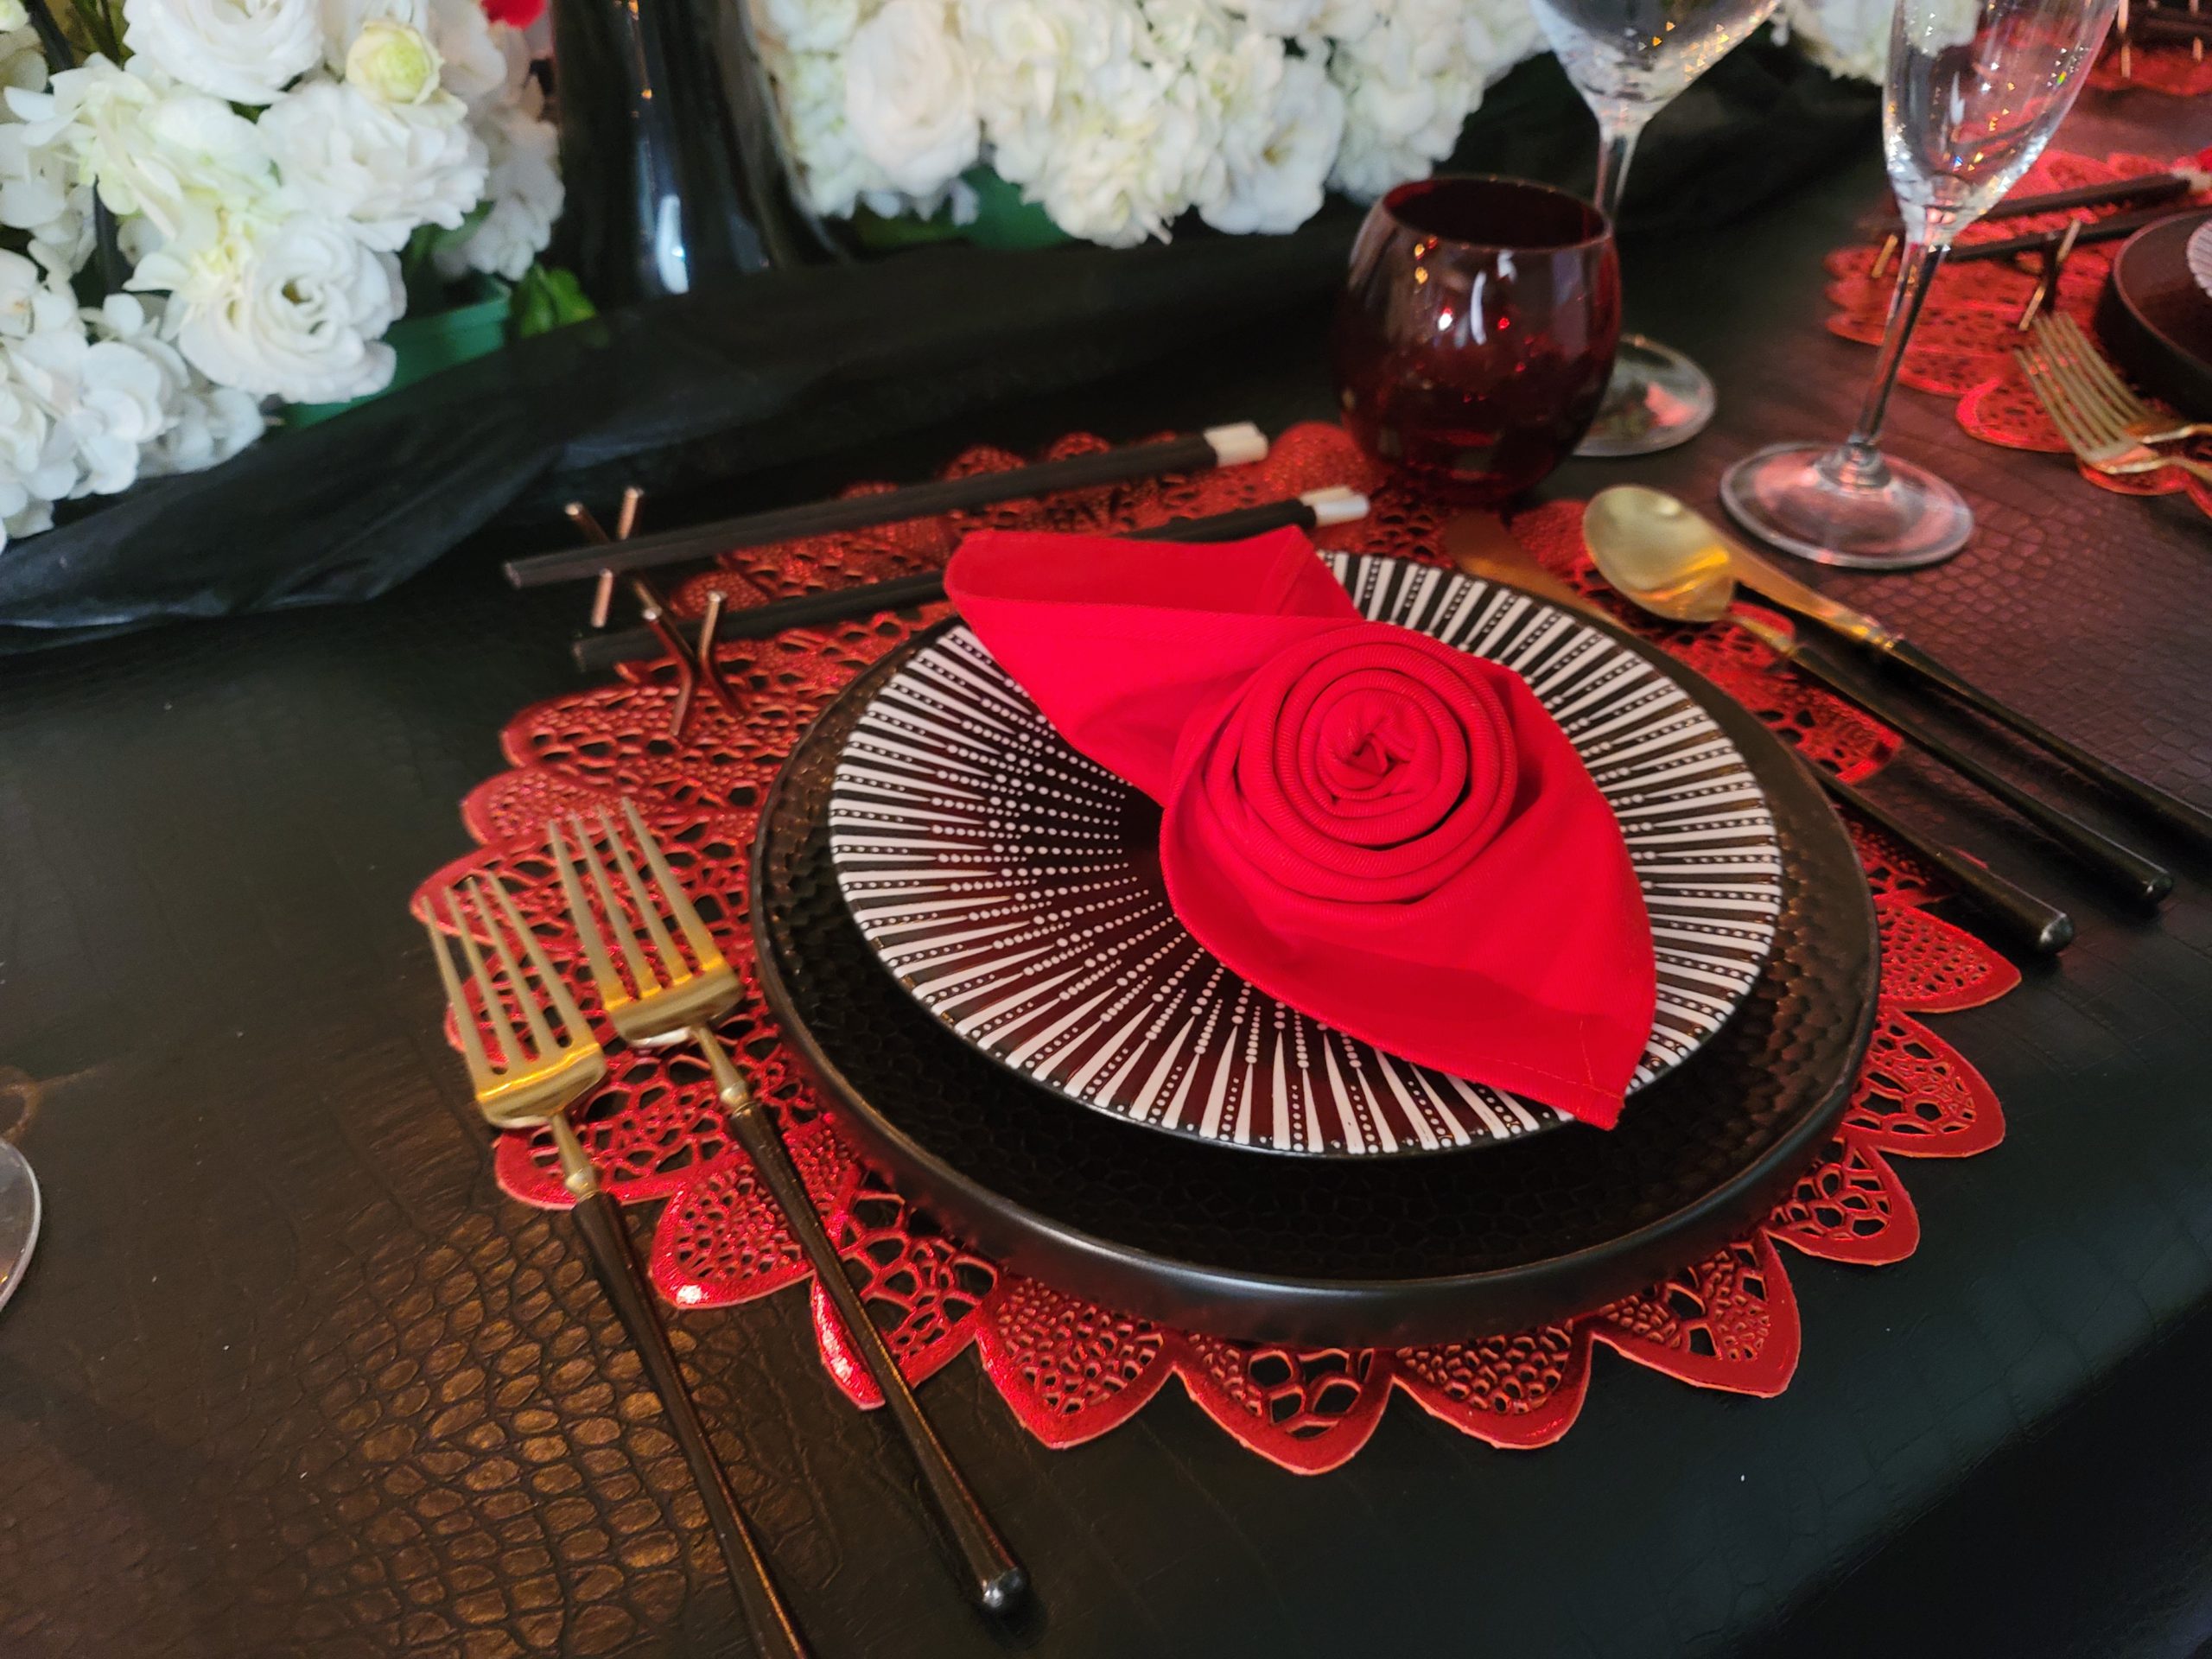 2nd element of a tablescape - simple napkin fold example